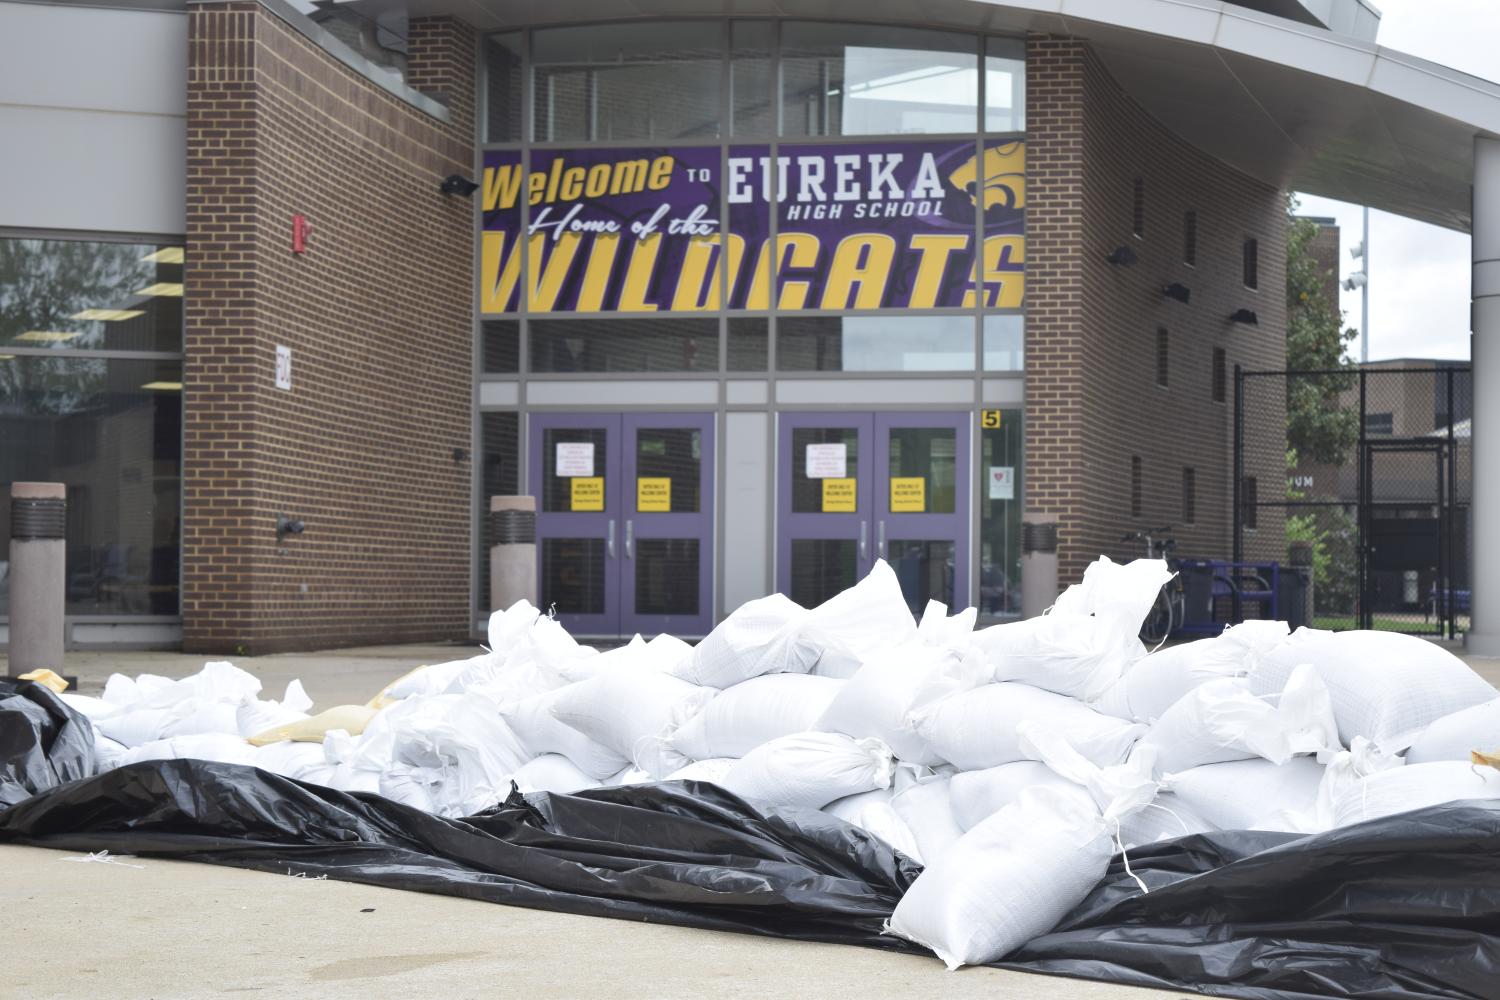 Volunteers prepare for the potential flooding of the school by stacking sandbags, April 30.